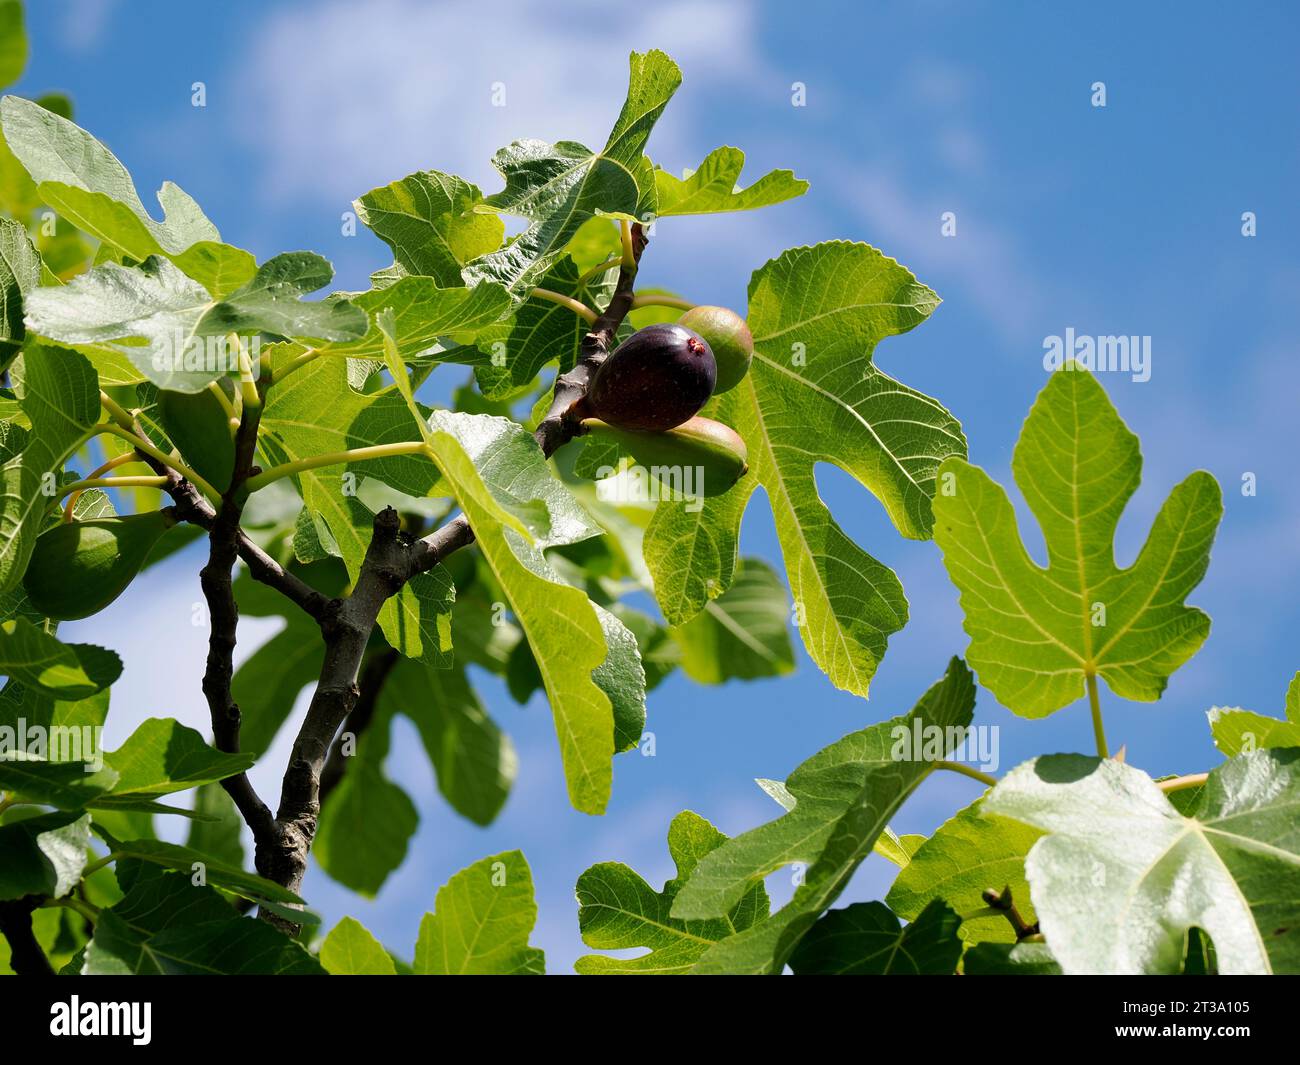 Figs on Ficus carica on a blue sky background Stock Photo